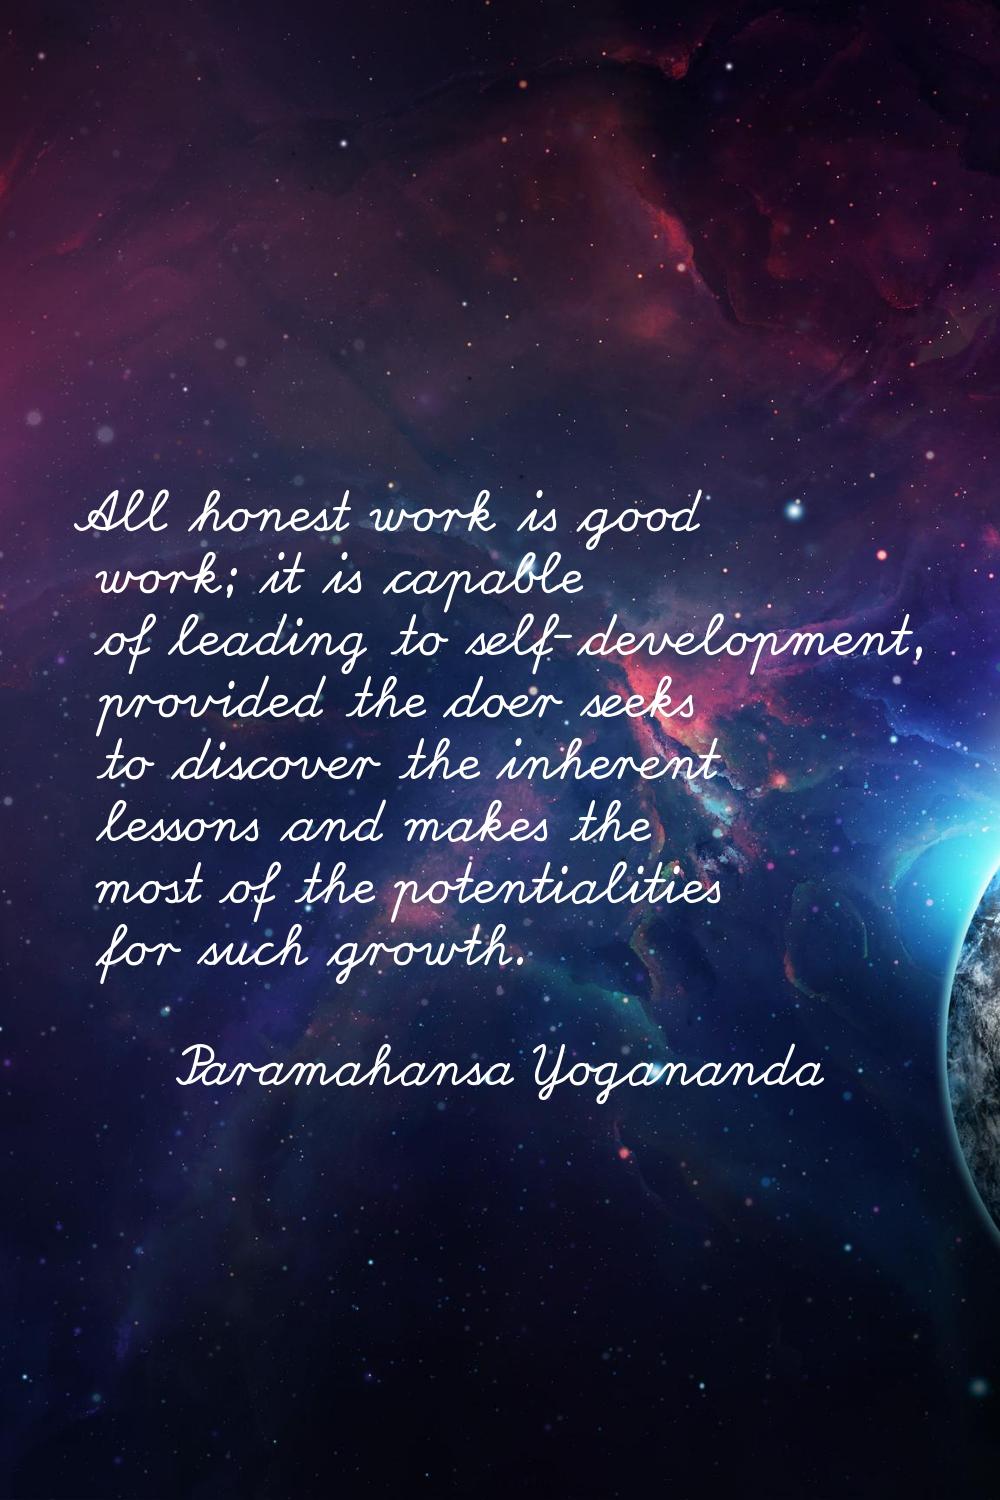 All honest work is good work; it is capable of leading to self-development, provided the doer seeks